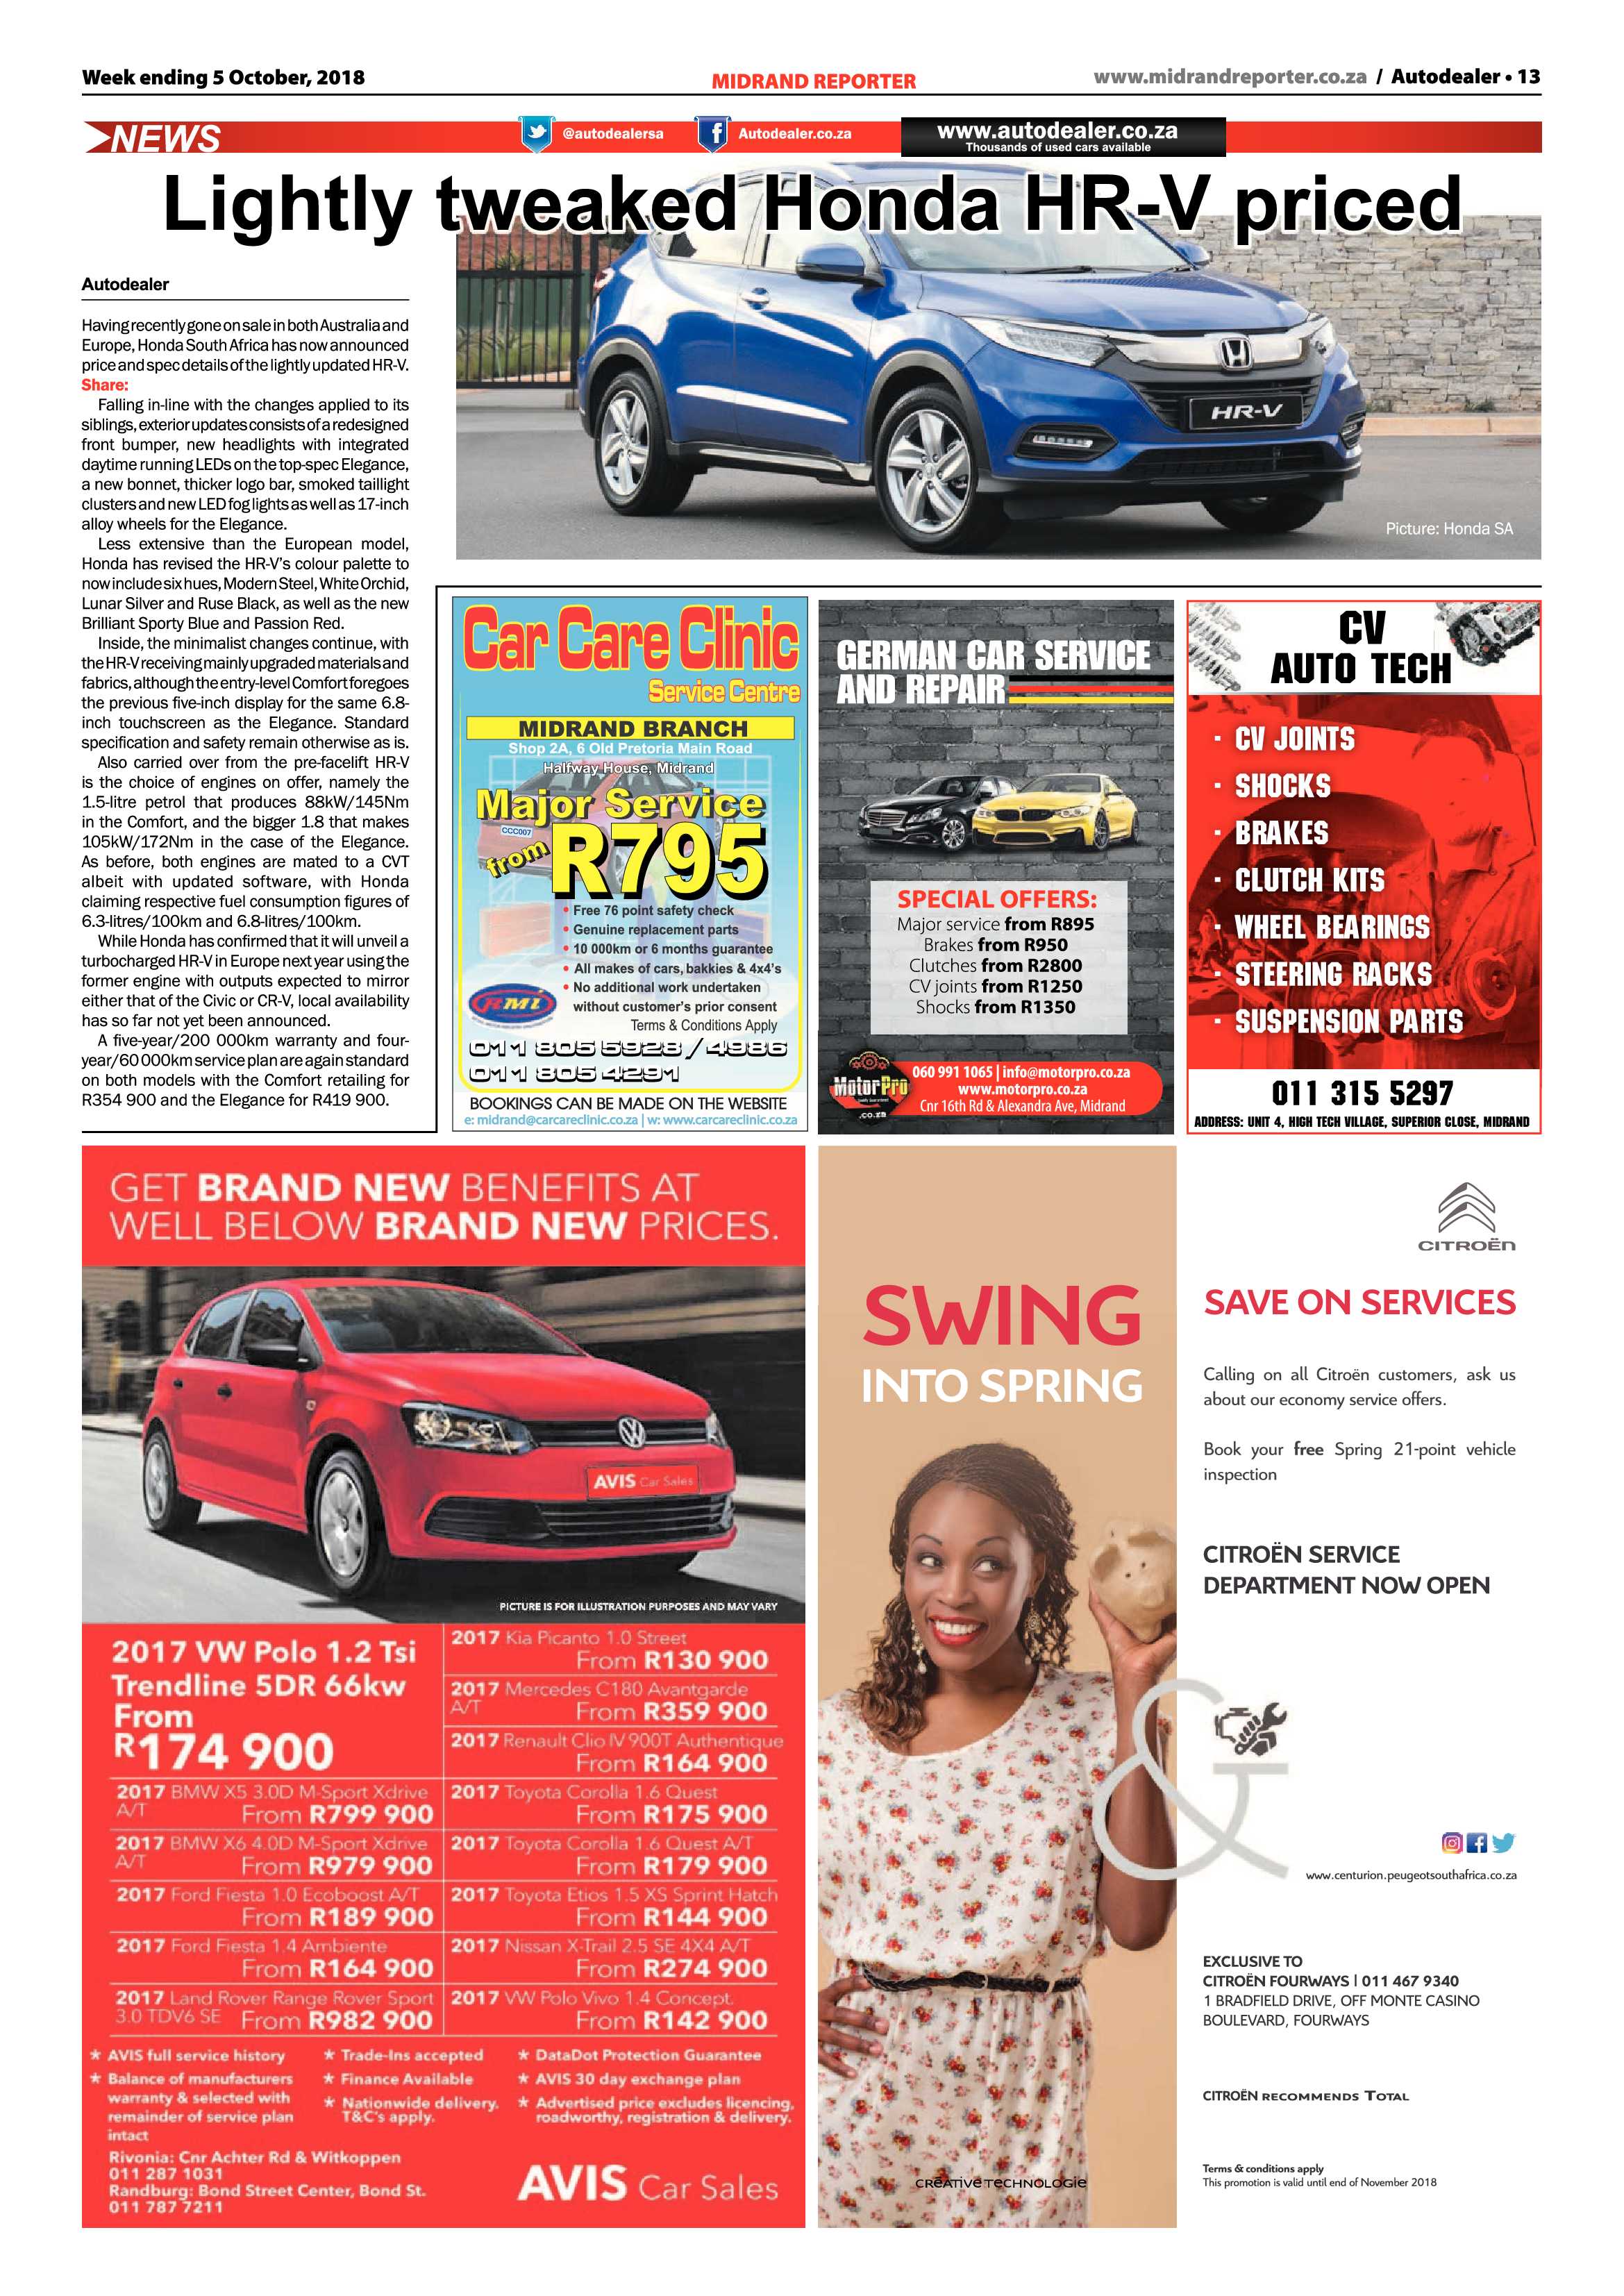 Midrand Reporter 5 October, 2018 page 13